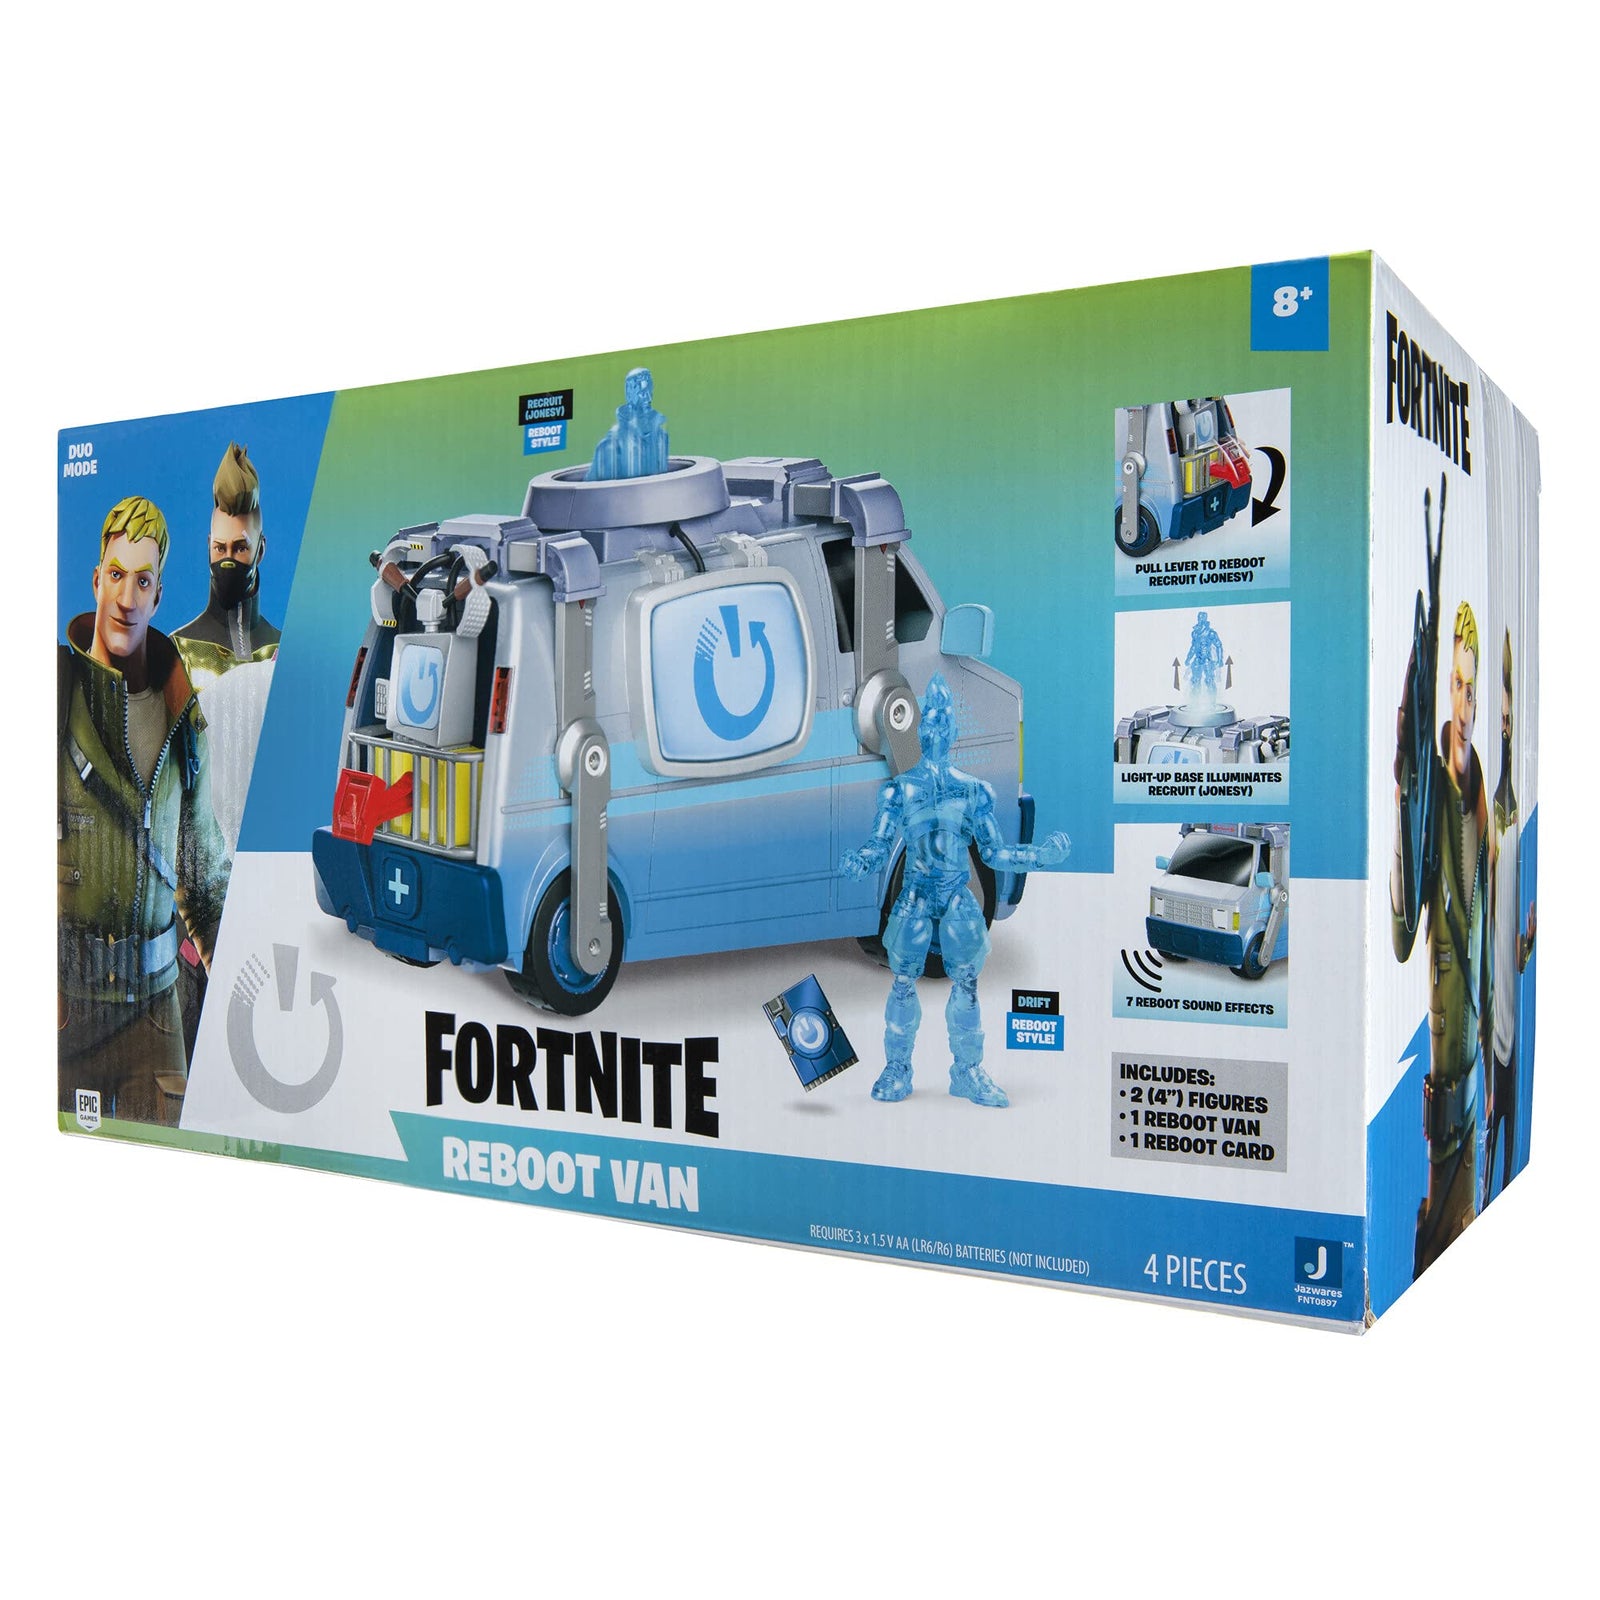 Fortnite Feature Deluxe Reboot Van Vehicle, Electronic Vehicle with Two 4-inch Articulated Reboot Drift (Stage 1) and Reboot Recruit Jonesy Figures, and Accessory - Amazon Exclusive